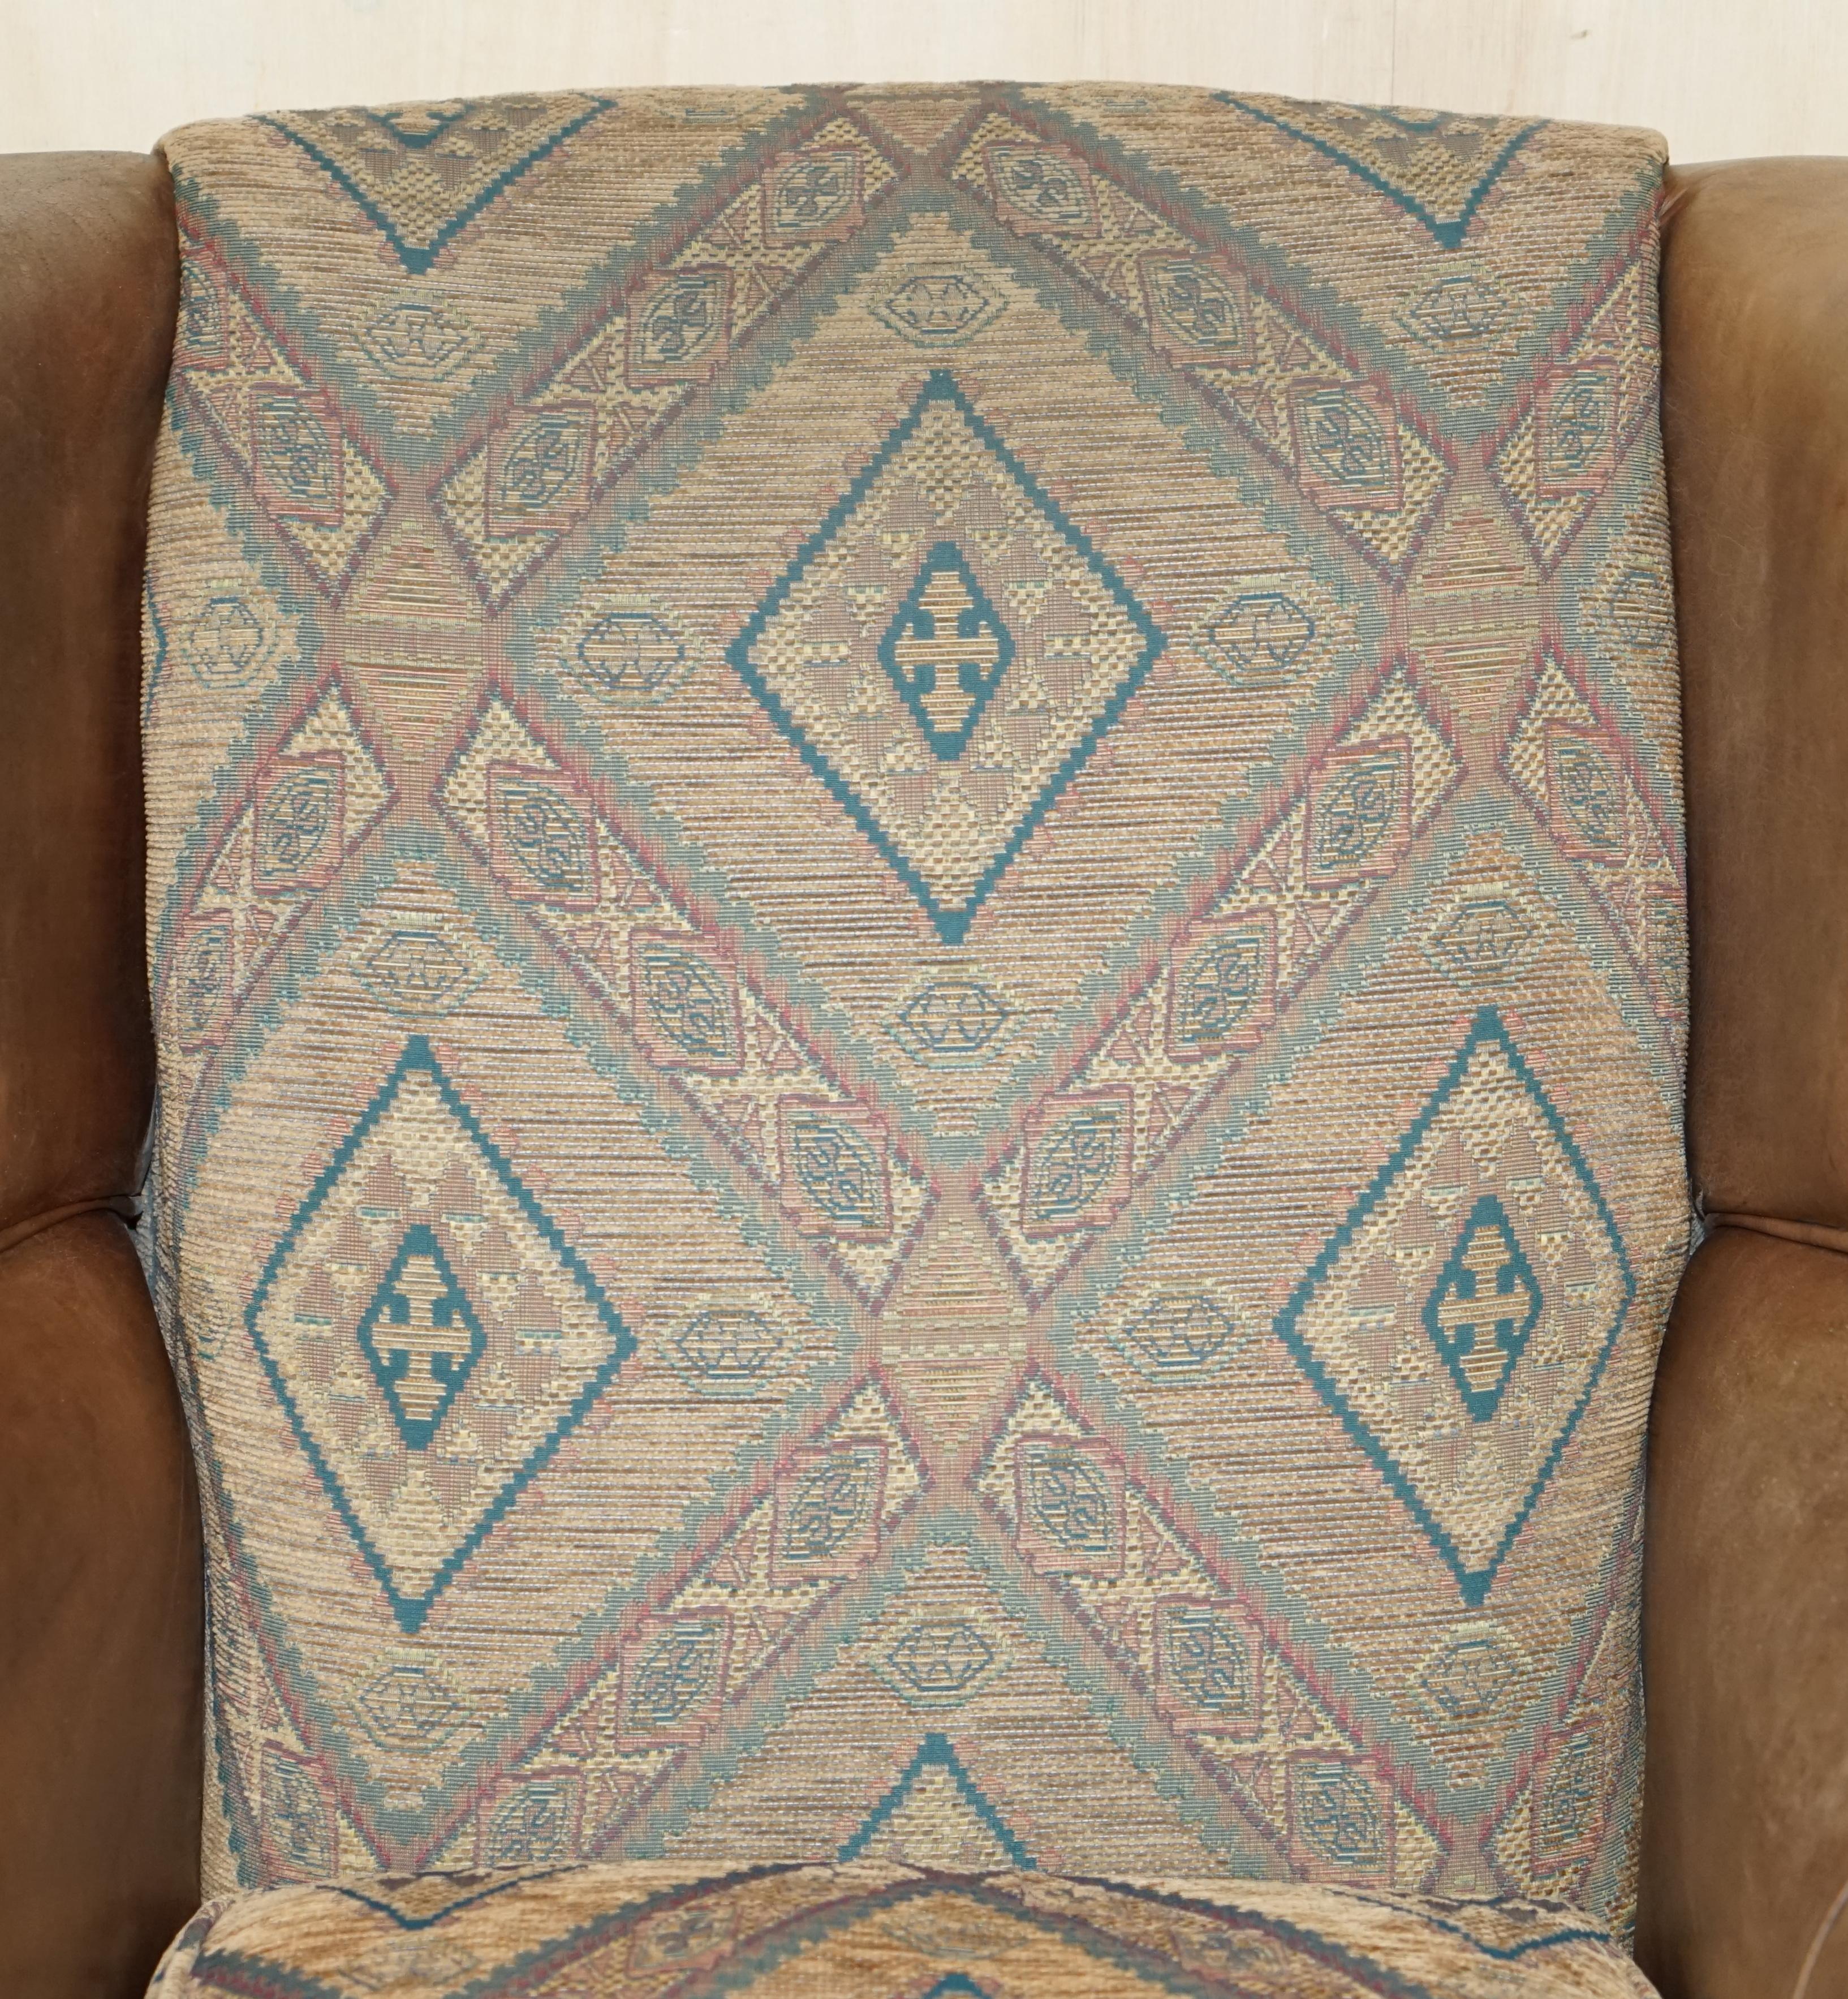 Hand-Crafted PAIR OF ViNTAGE THOMAS LLOYD BROWN LEATHER KILIM ARMCHAIRS FROM SCOTTISH CASTLe